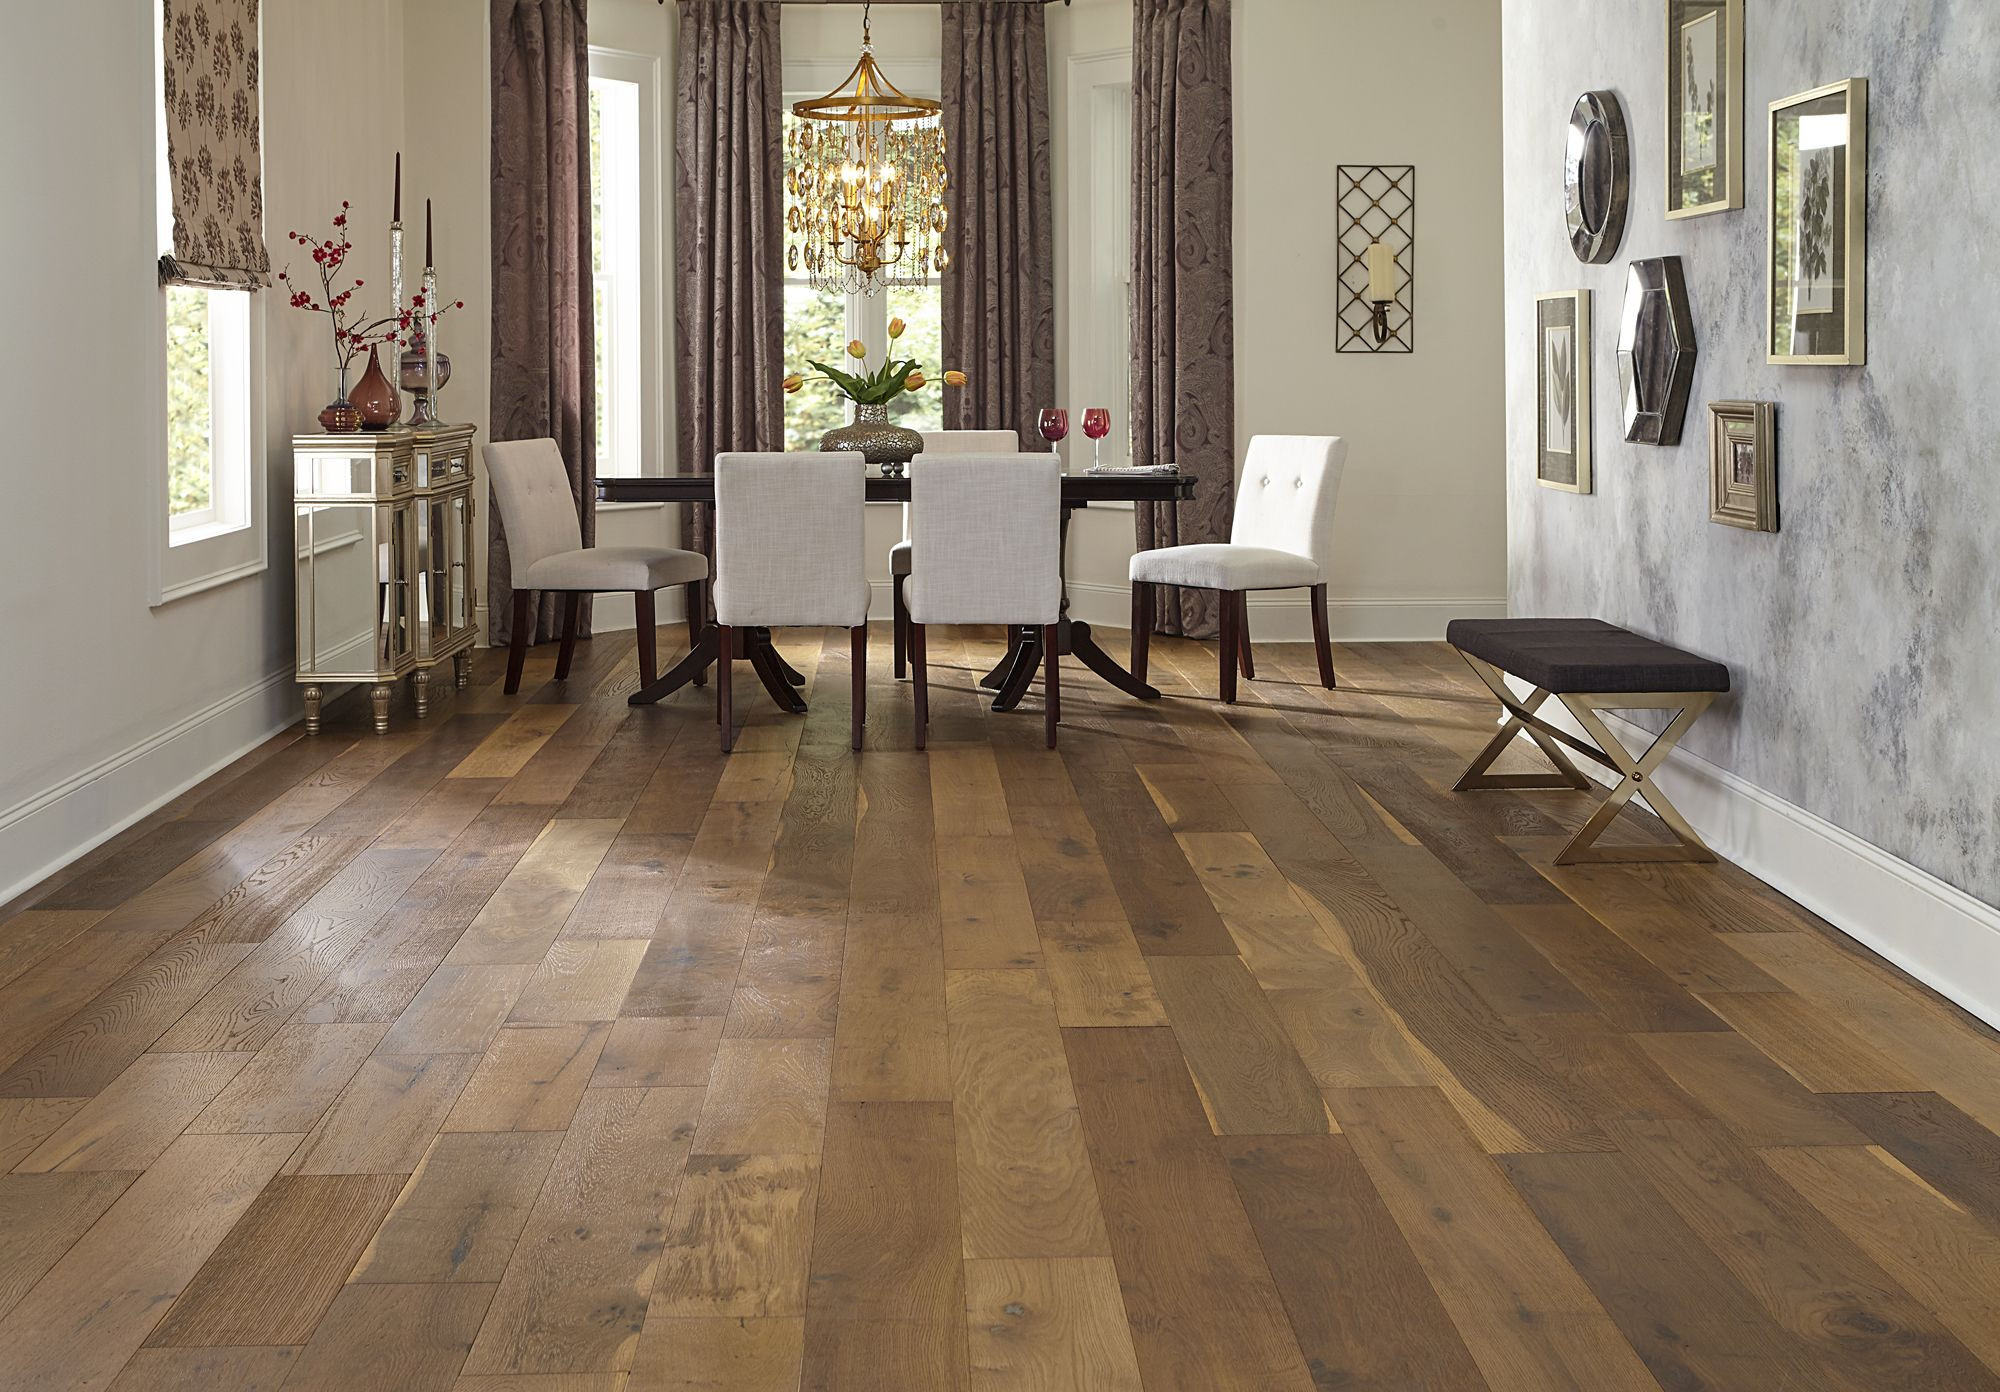 16 Unique 5 Inch Maple Hardwood Flooring 2024 free download 5 inch maple hardwood flooring of 7 1 2 wide planks and a rustic look bellawood willow manor oak has in 7 1 2 wide planks and a rustic look bellawood willow manor oak has a storied old world